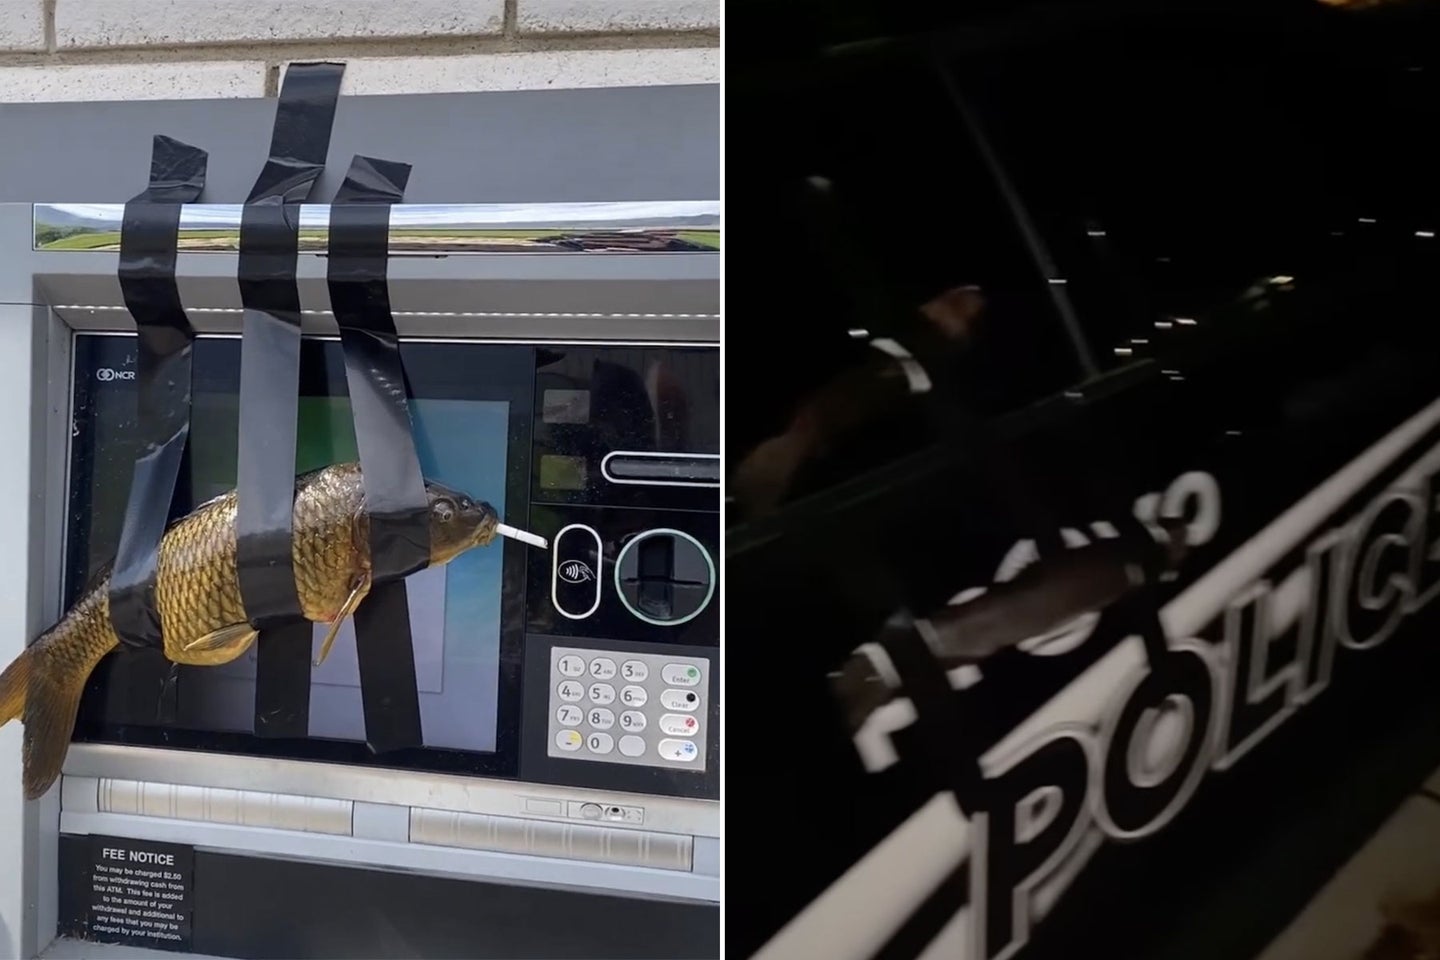 Utah Teen Sent to Juvenile Court for Duct Taping Dead Fish to ATMs